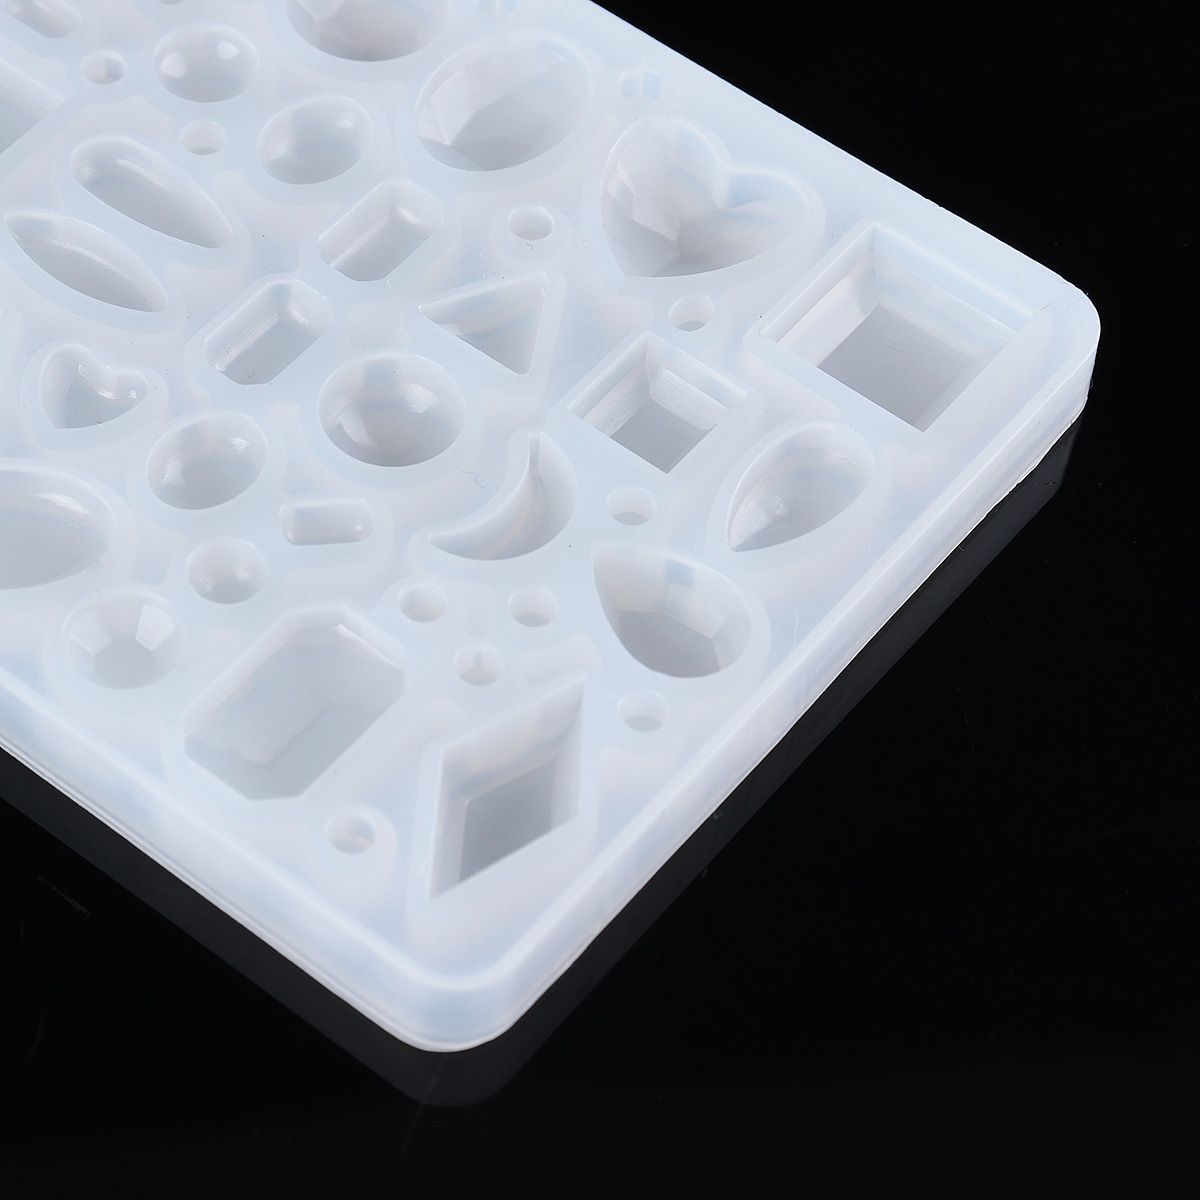 27Pcs-DIY-Craft-Tools-Kit-Silicone-Crystal-Mold-Making-Jewelry-Pendant-Resin-Casting-1364438